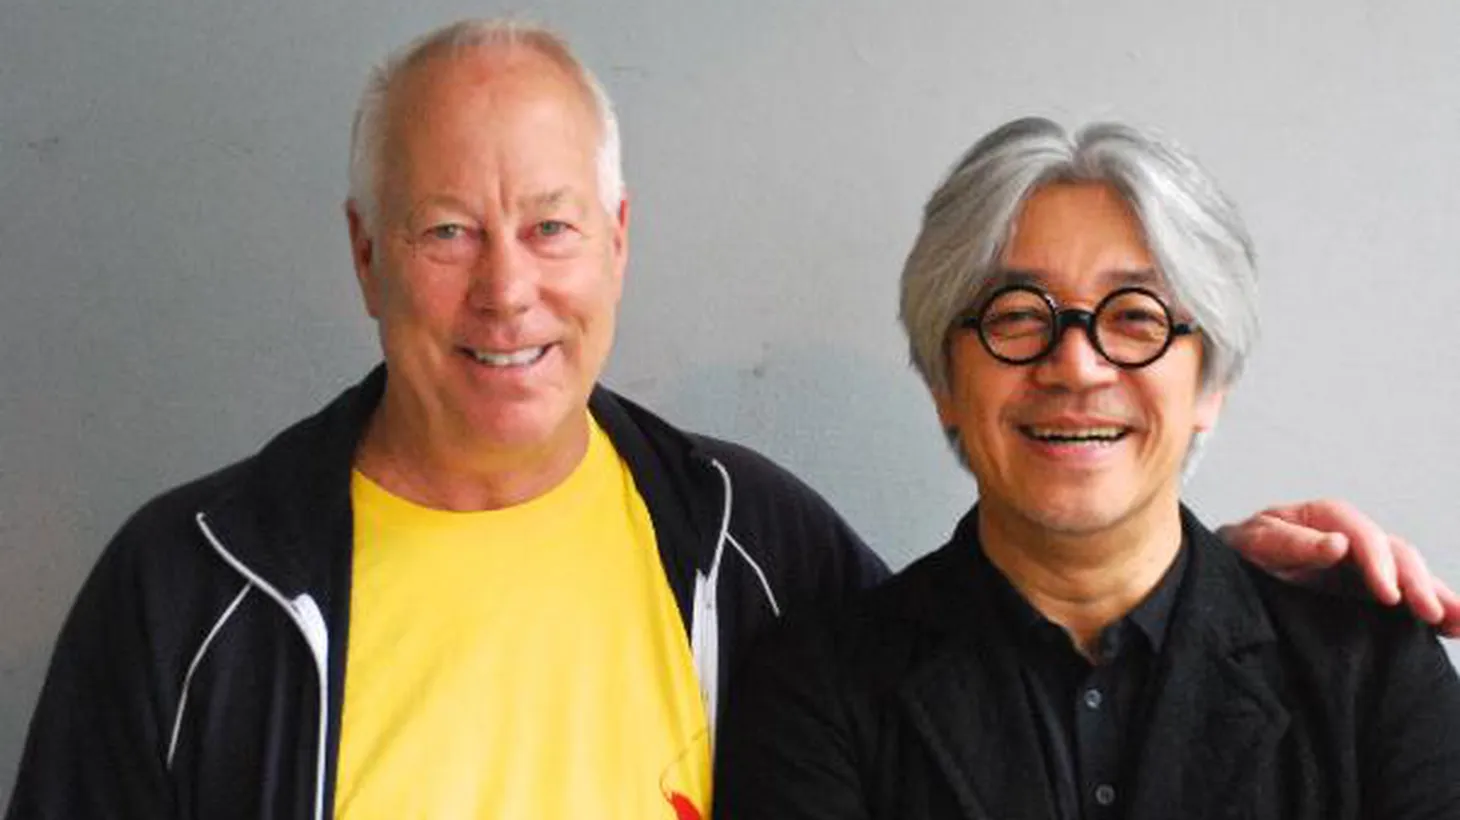 Tom interviews Ryuichi Sakamoto, the Academy Award-winning Japanese composer about his love for John Cage, Toru Takemitsu, his fame, and his latest two-CD set, “Playing the Piano and Out of Noise.”